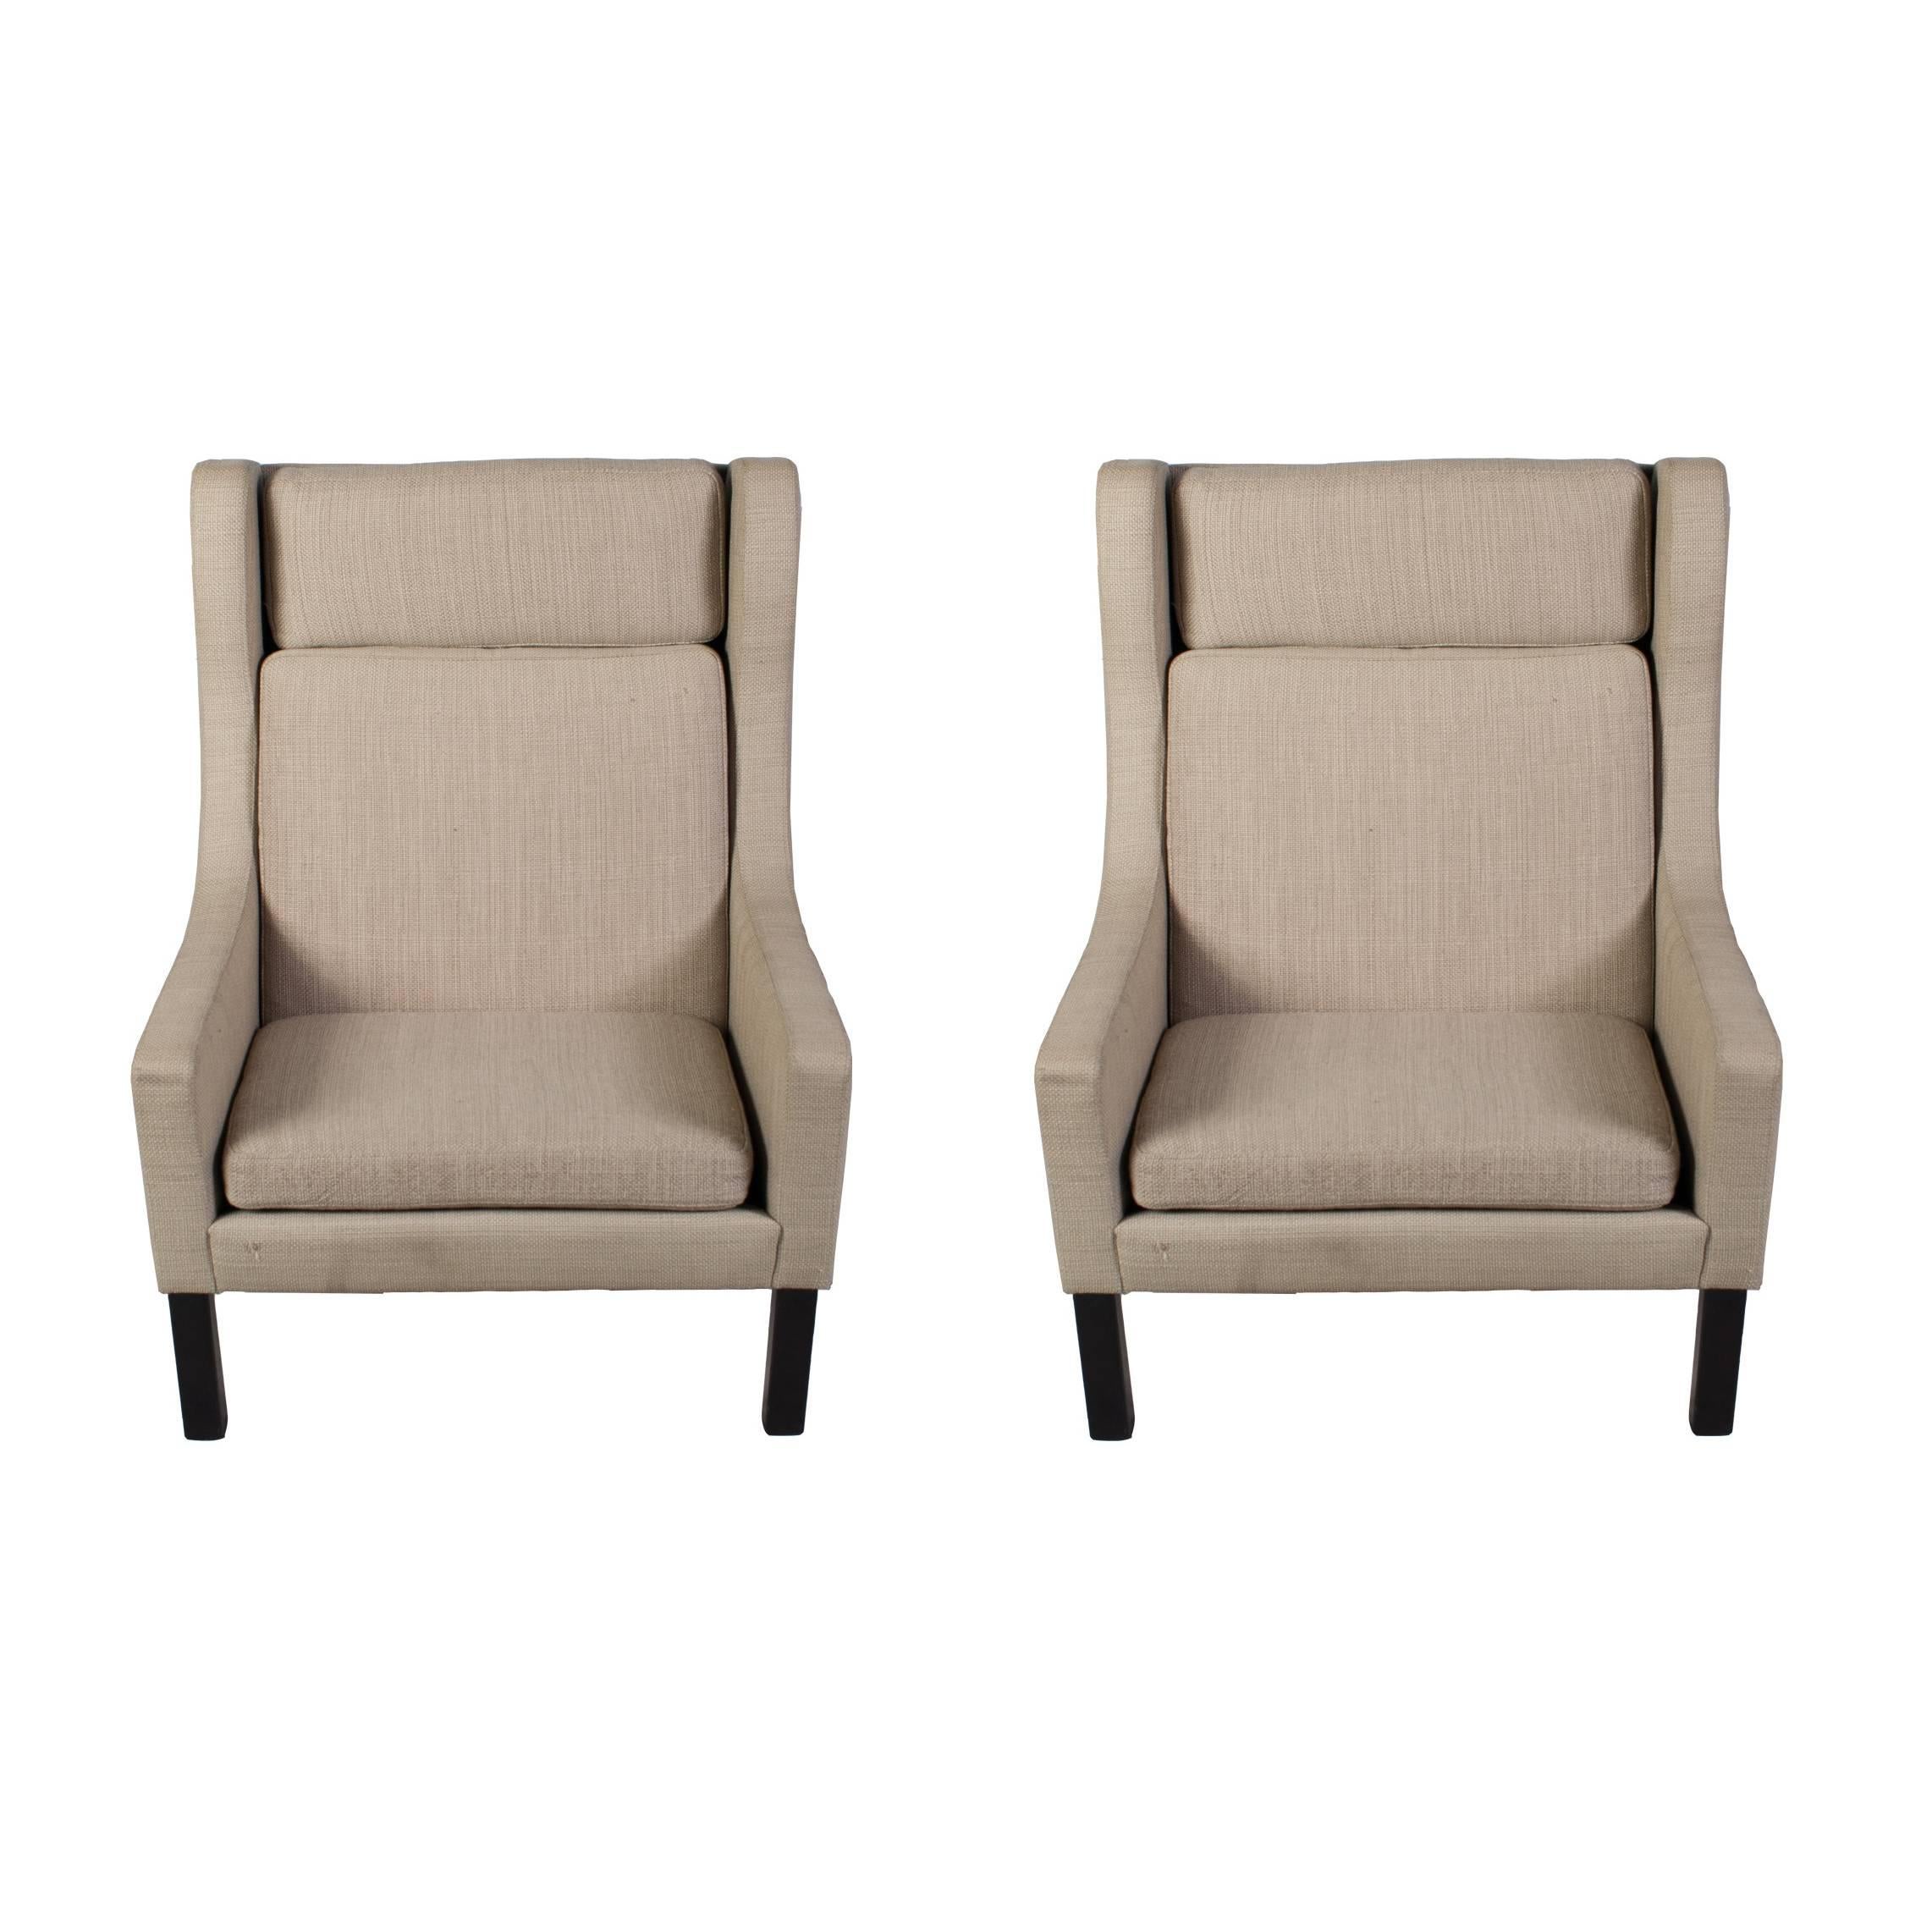 Very Modern Looking Pair of Wing Chairs